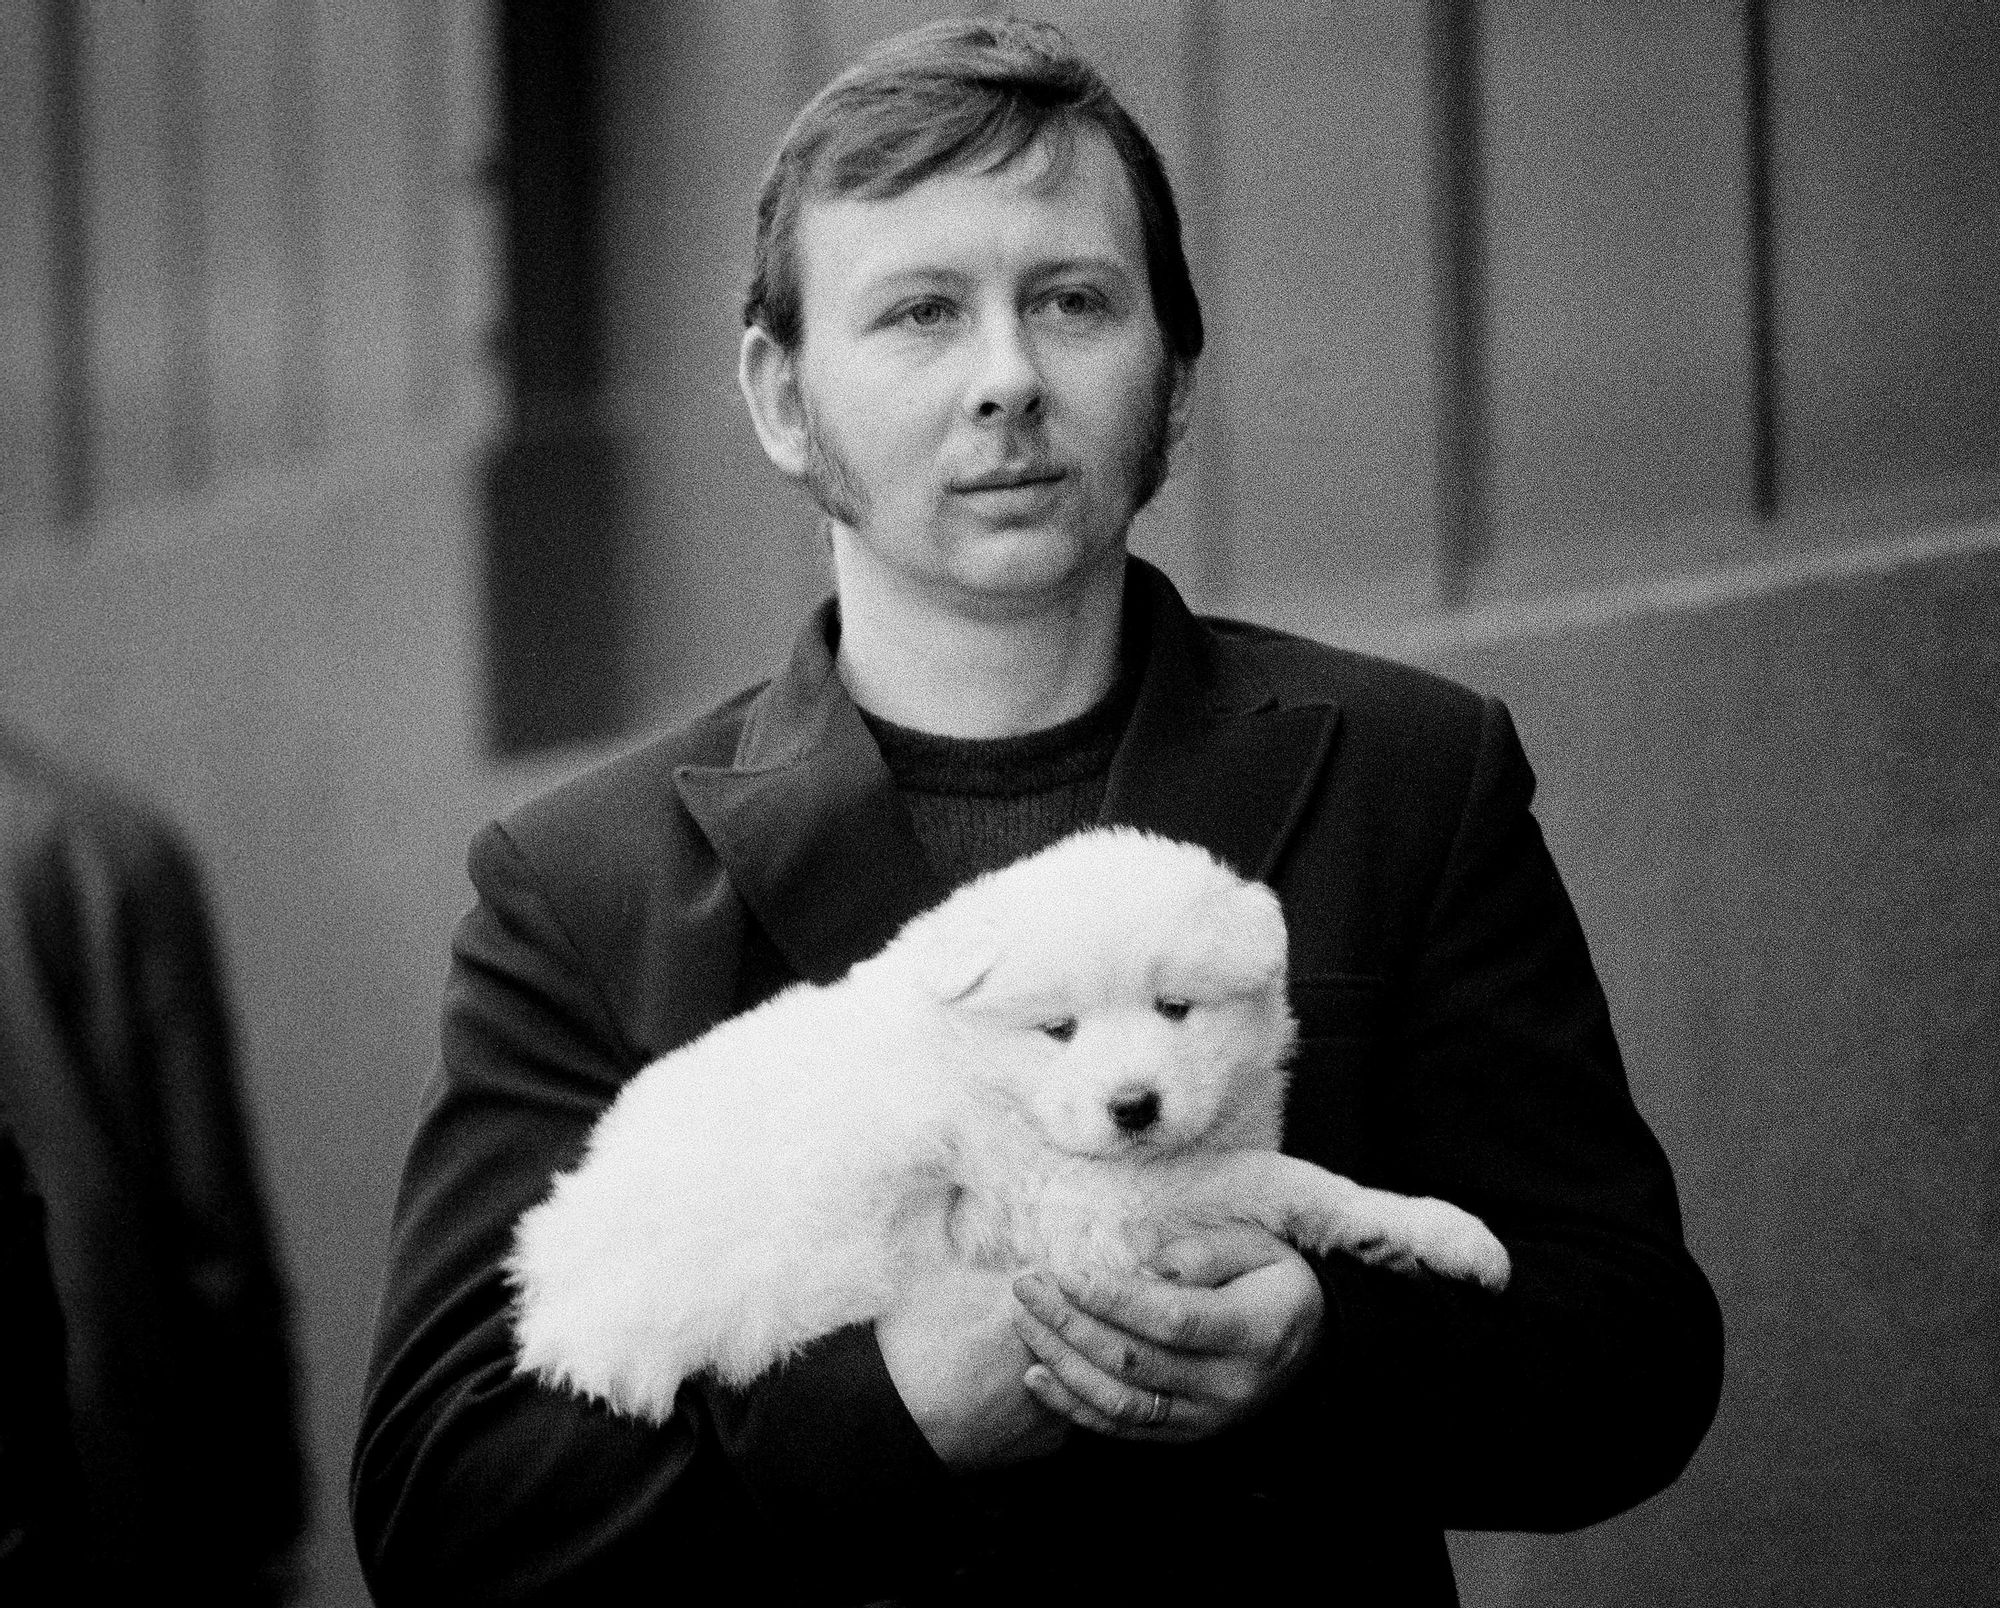 S_B&W_Dog_Show_Man_Carrying_Little_White_Dog_10